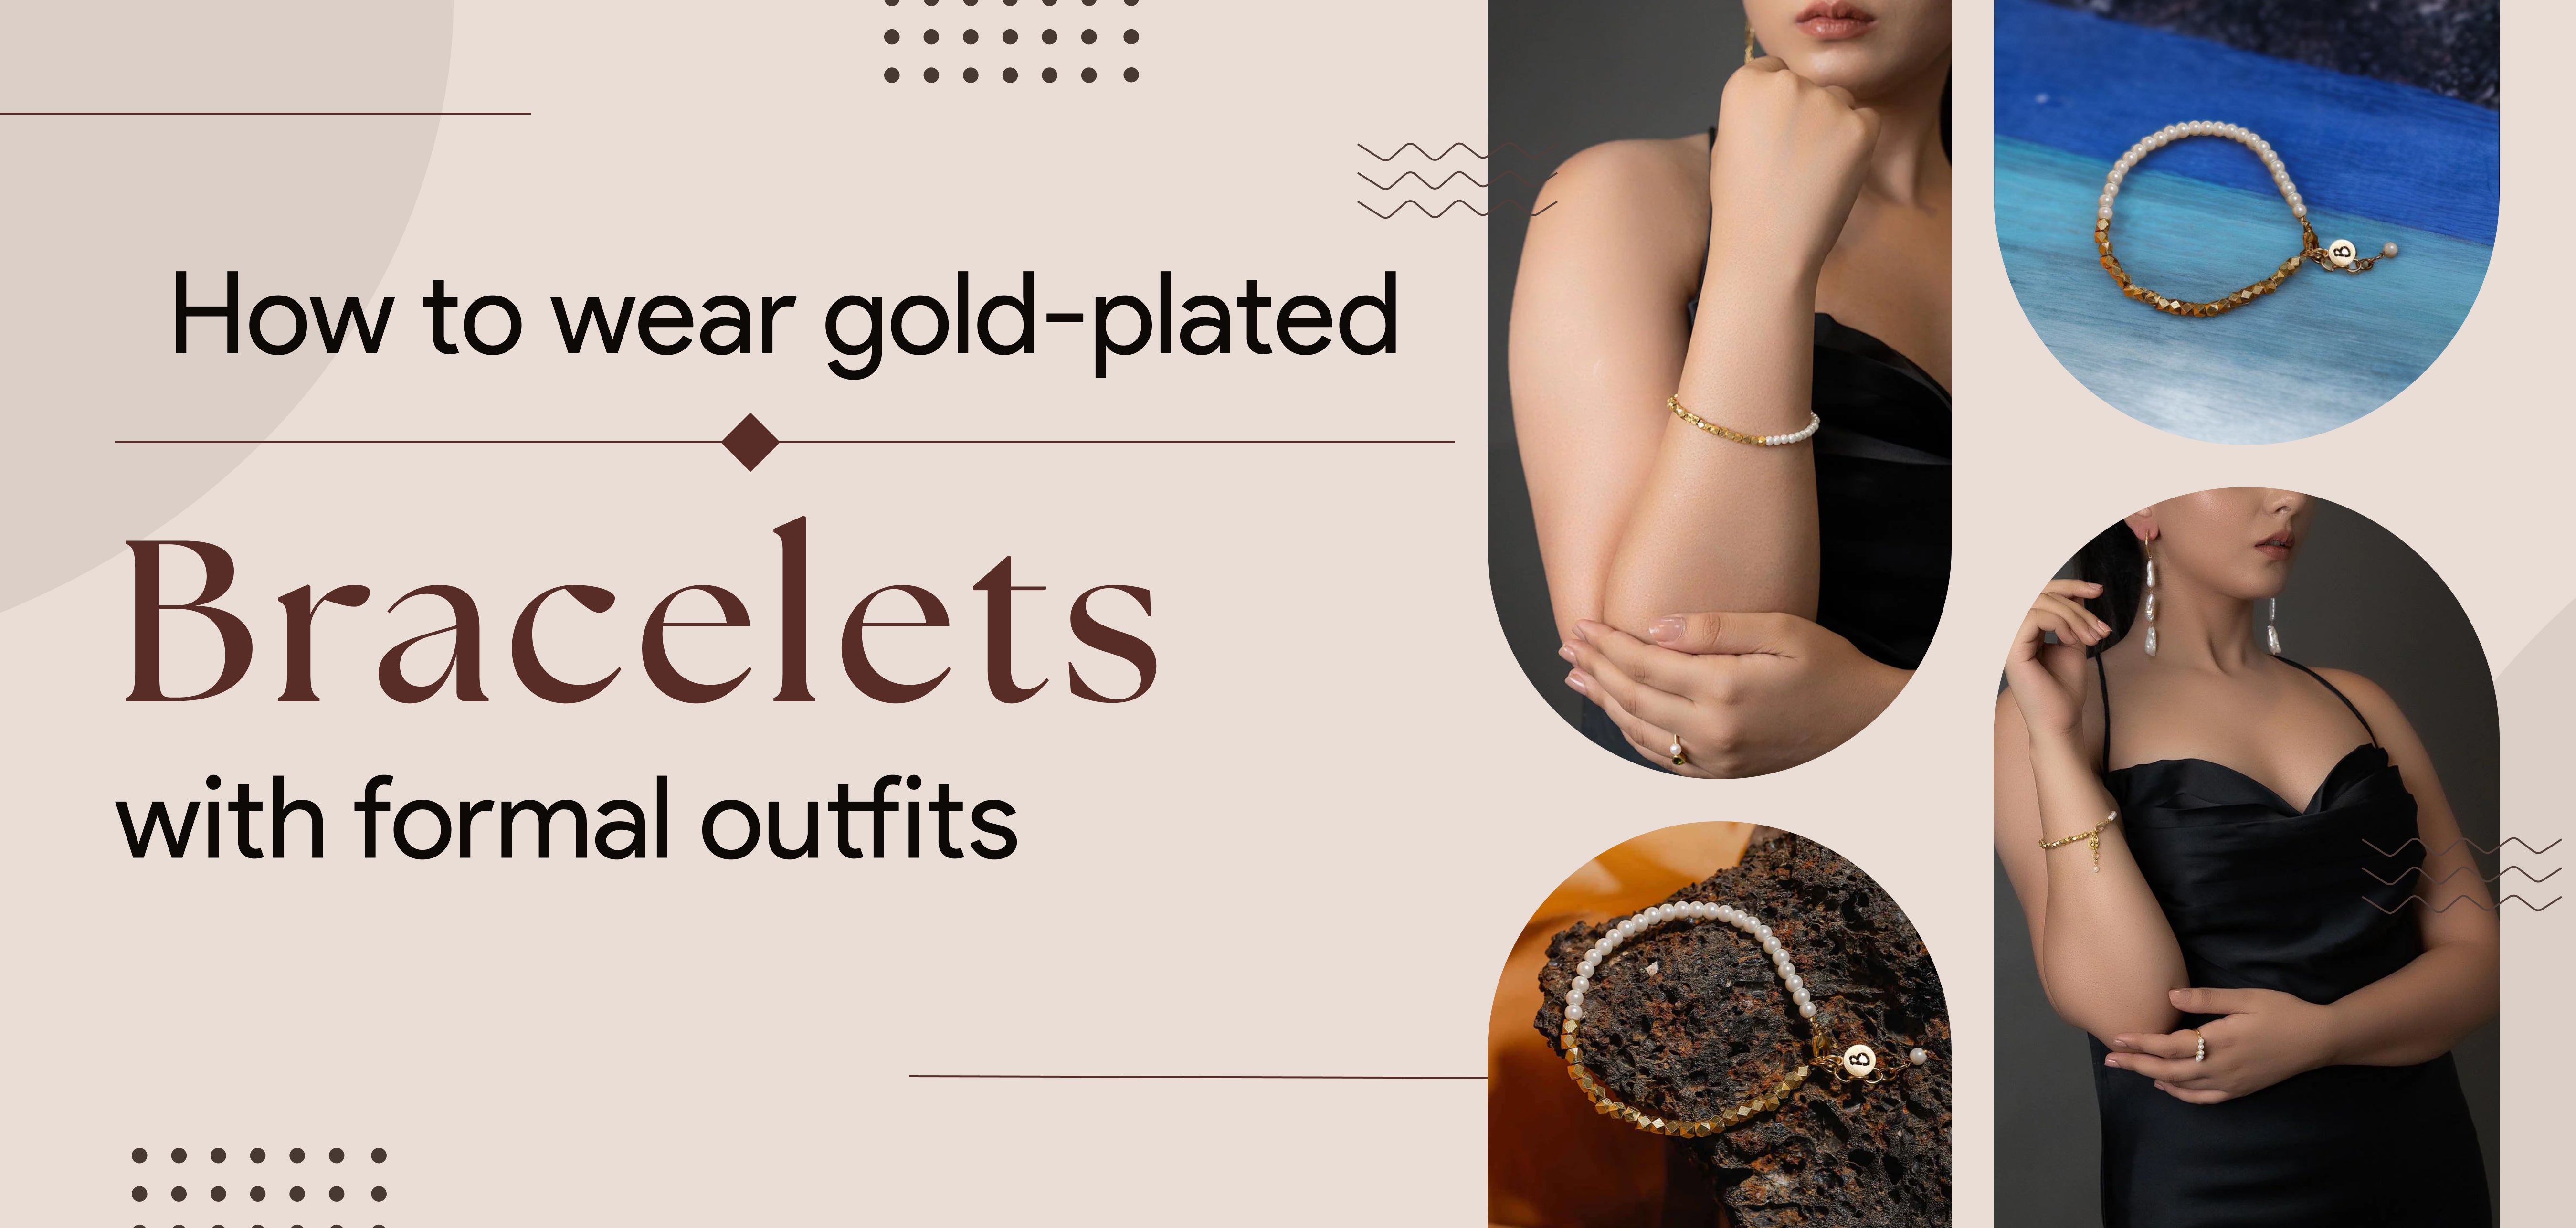 How to wear gold-plated bracelets with formal outfits